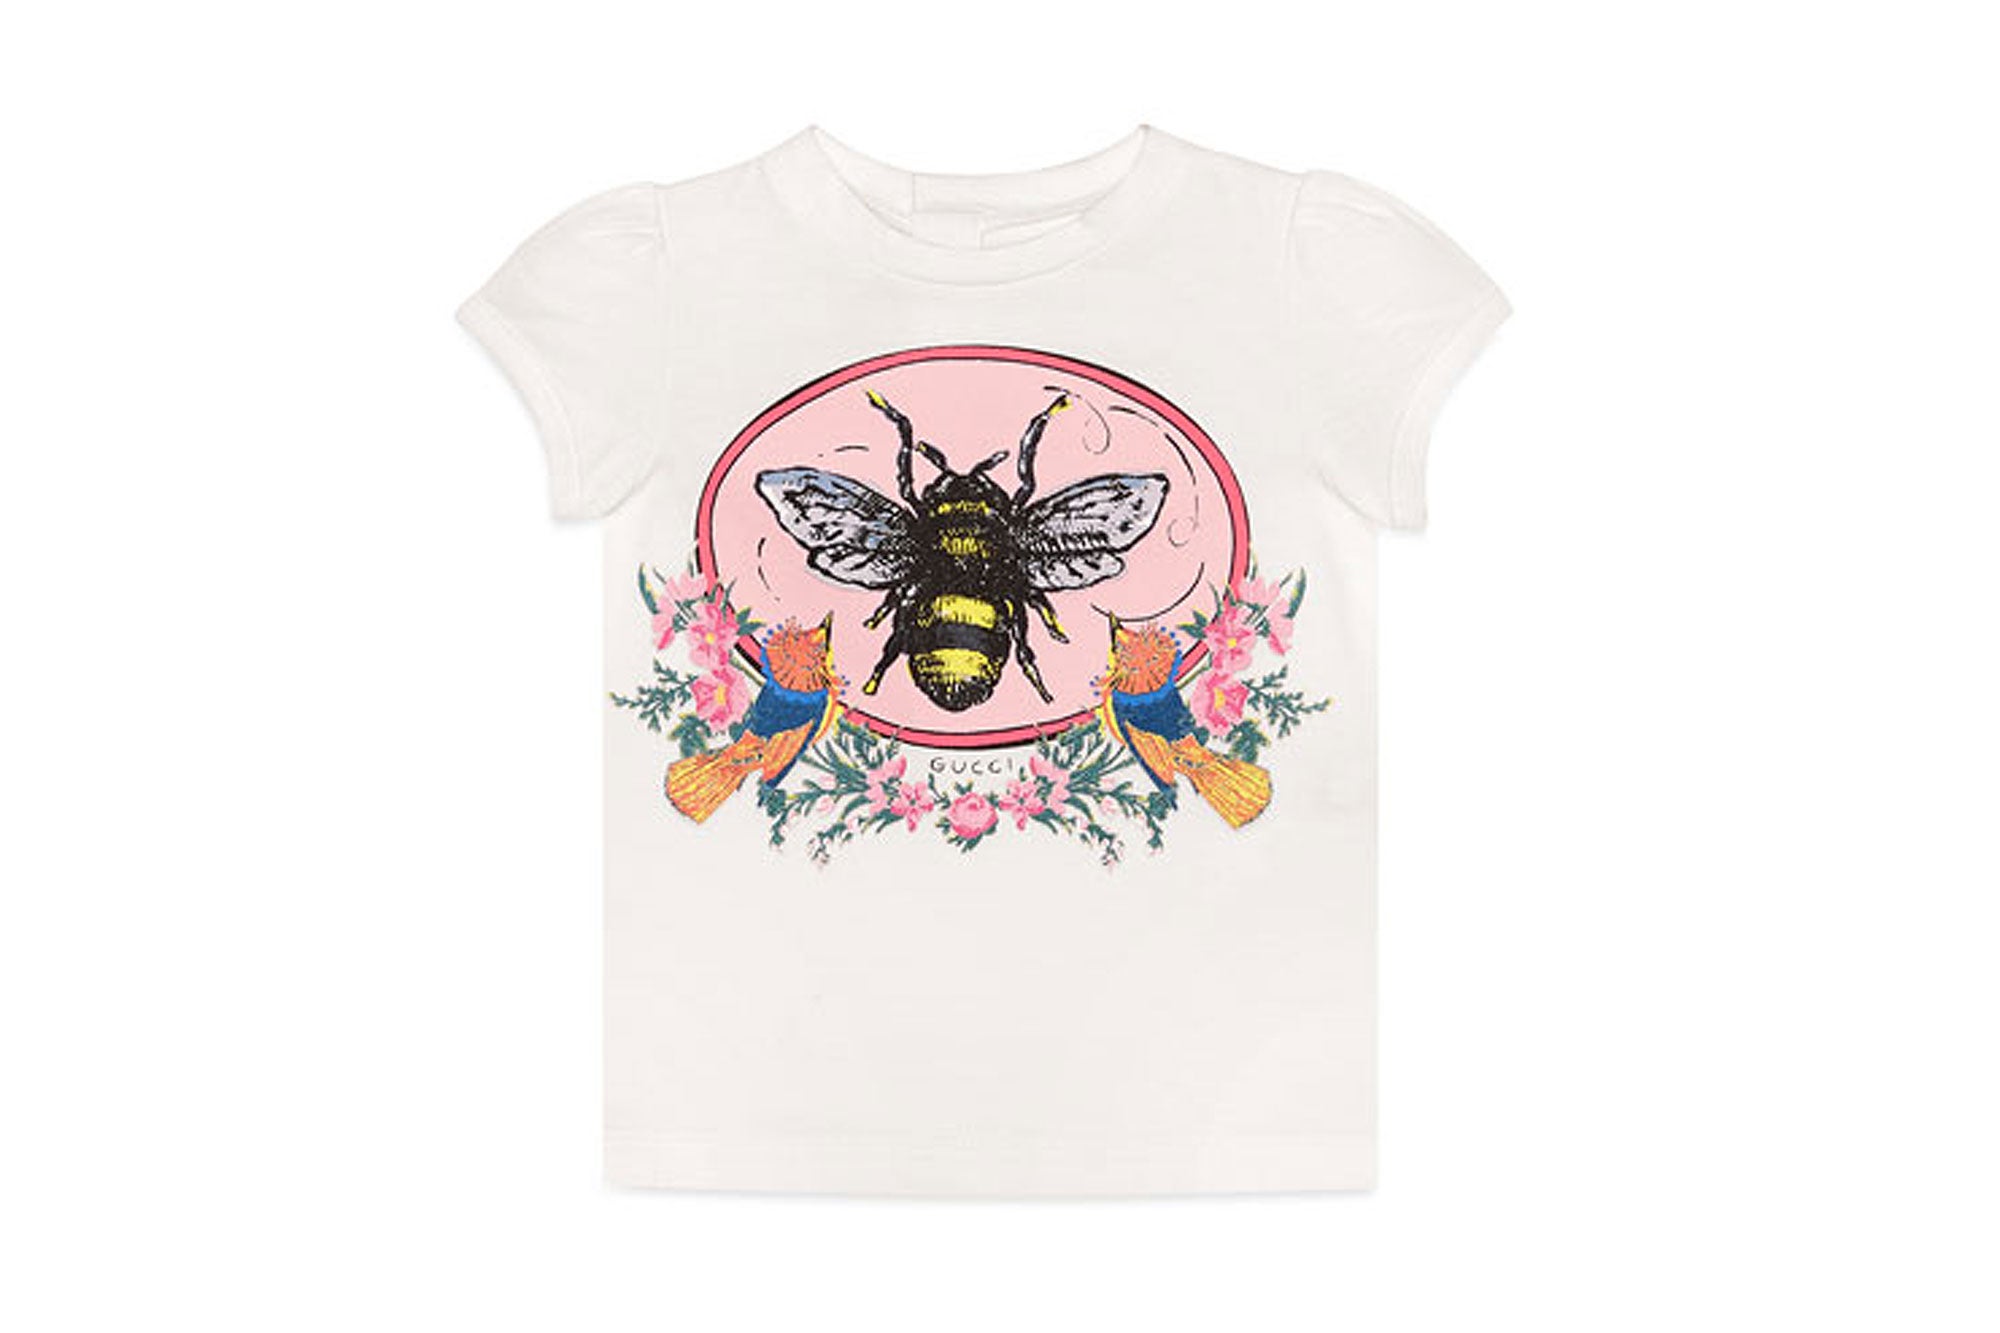 Hive Goals! 22 Buzz-Worthy (and Bee-Themed) Finds for Beyonce's Twins